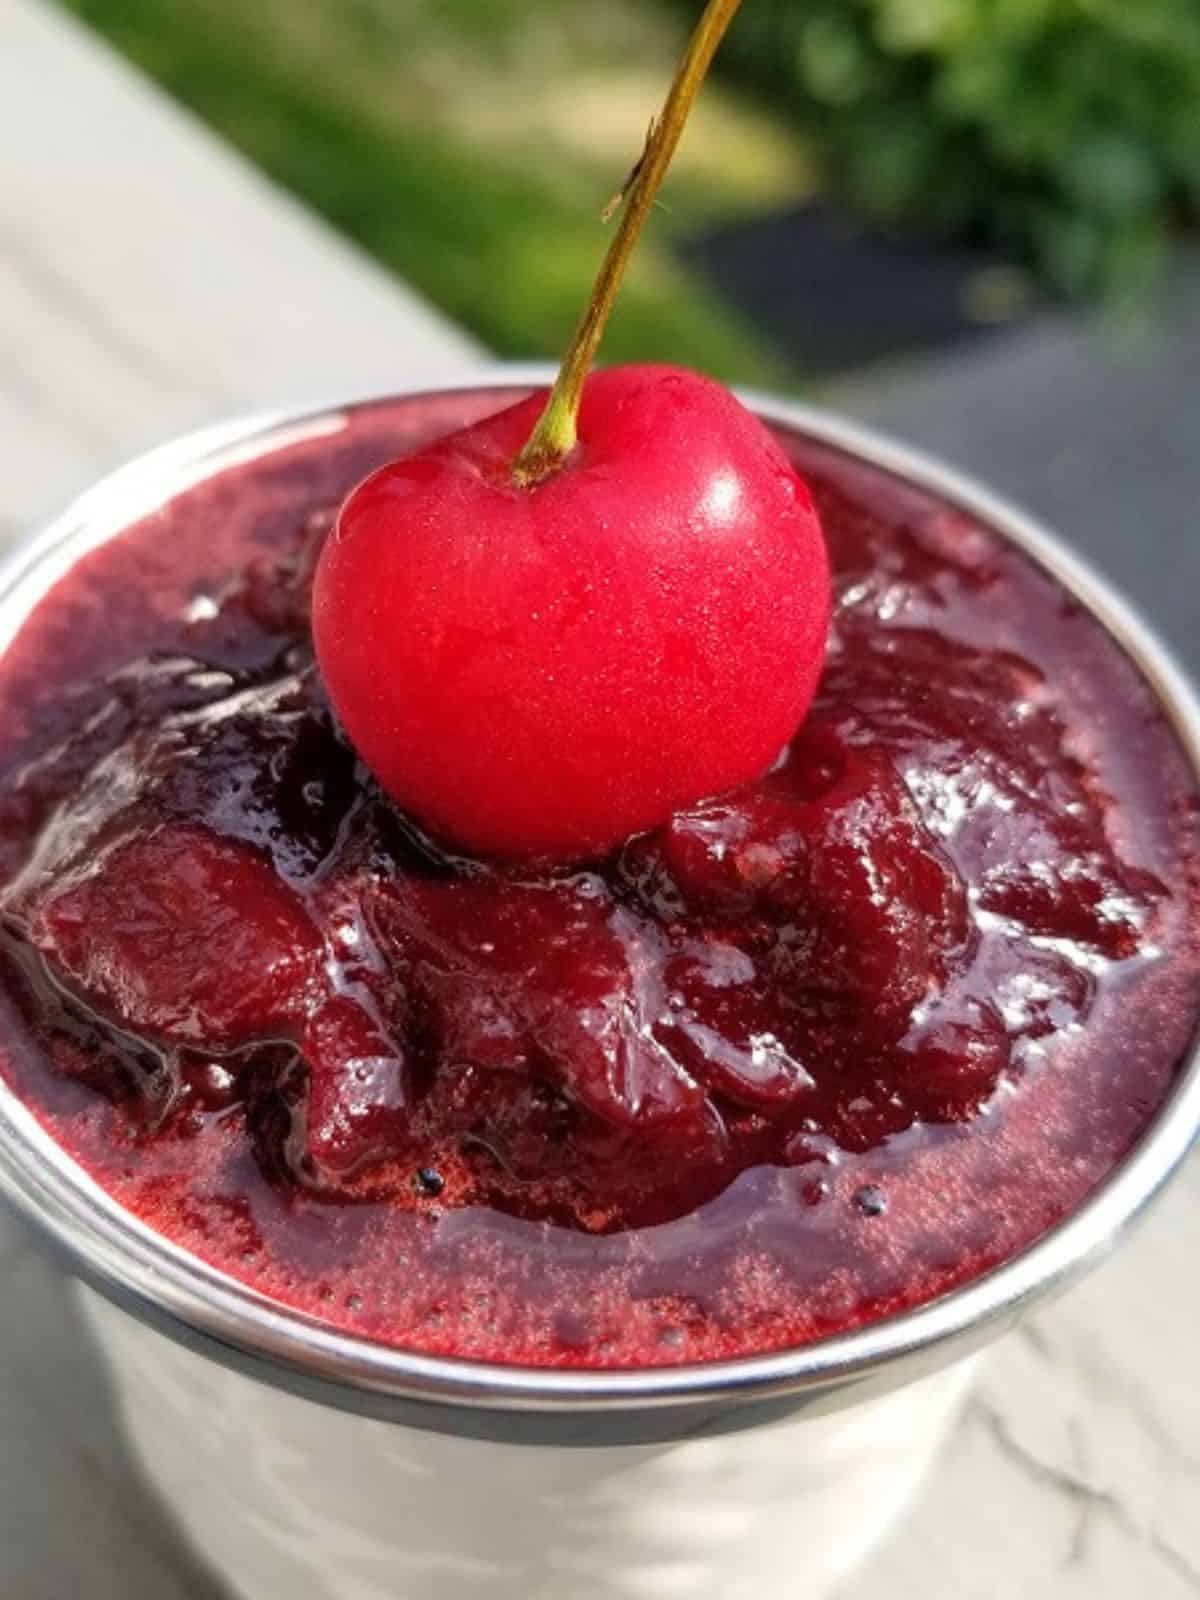 fresh cherry on top of cherry jam in a glass jar.